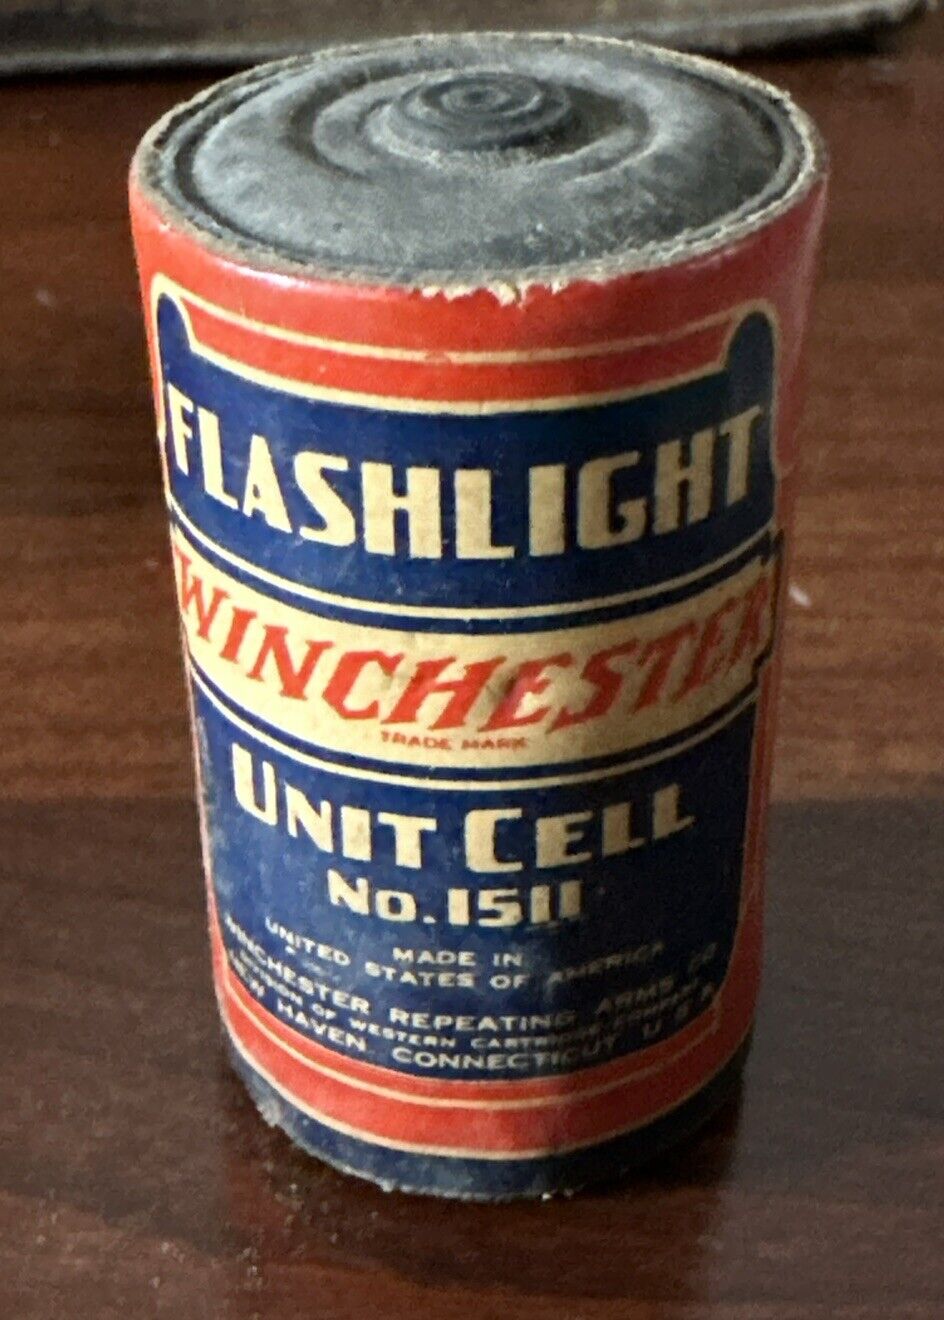 Vintage Winchester Flashlight Battery No. 1511 w/Paper Label. Use by Feb 1947